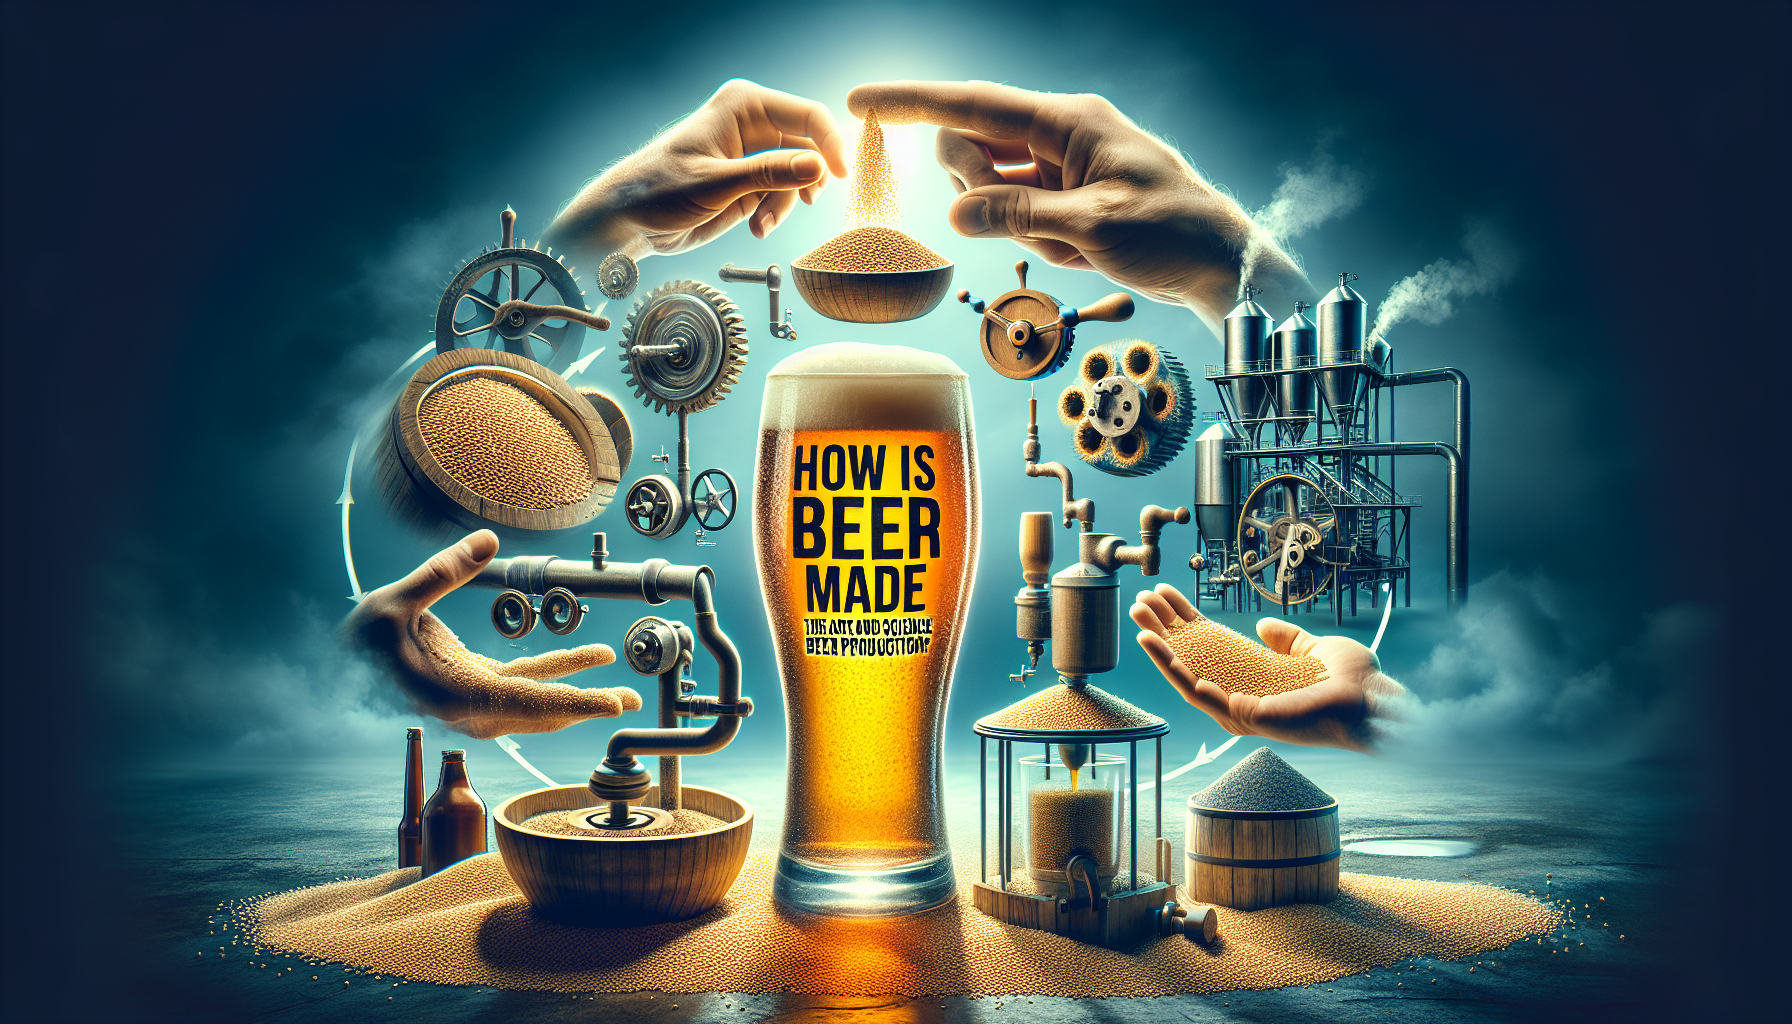 How is Beer Made: The Art and Science Behind Beer Production?